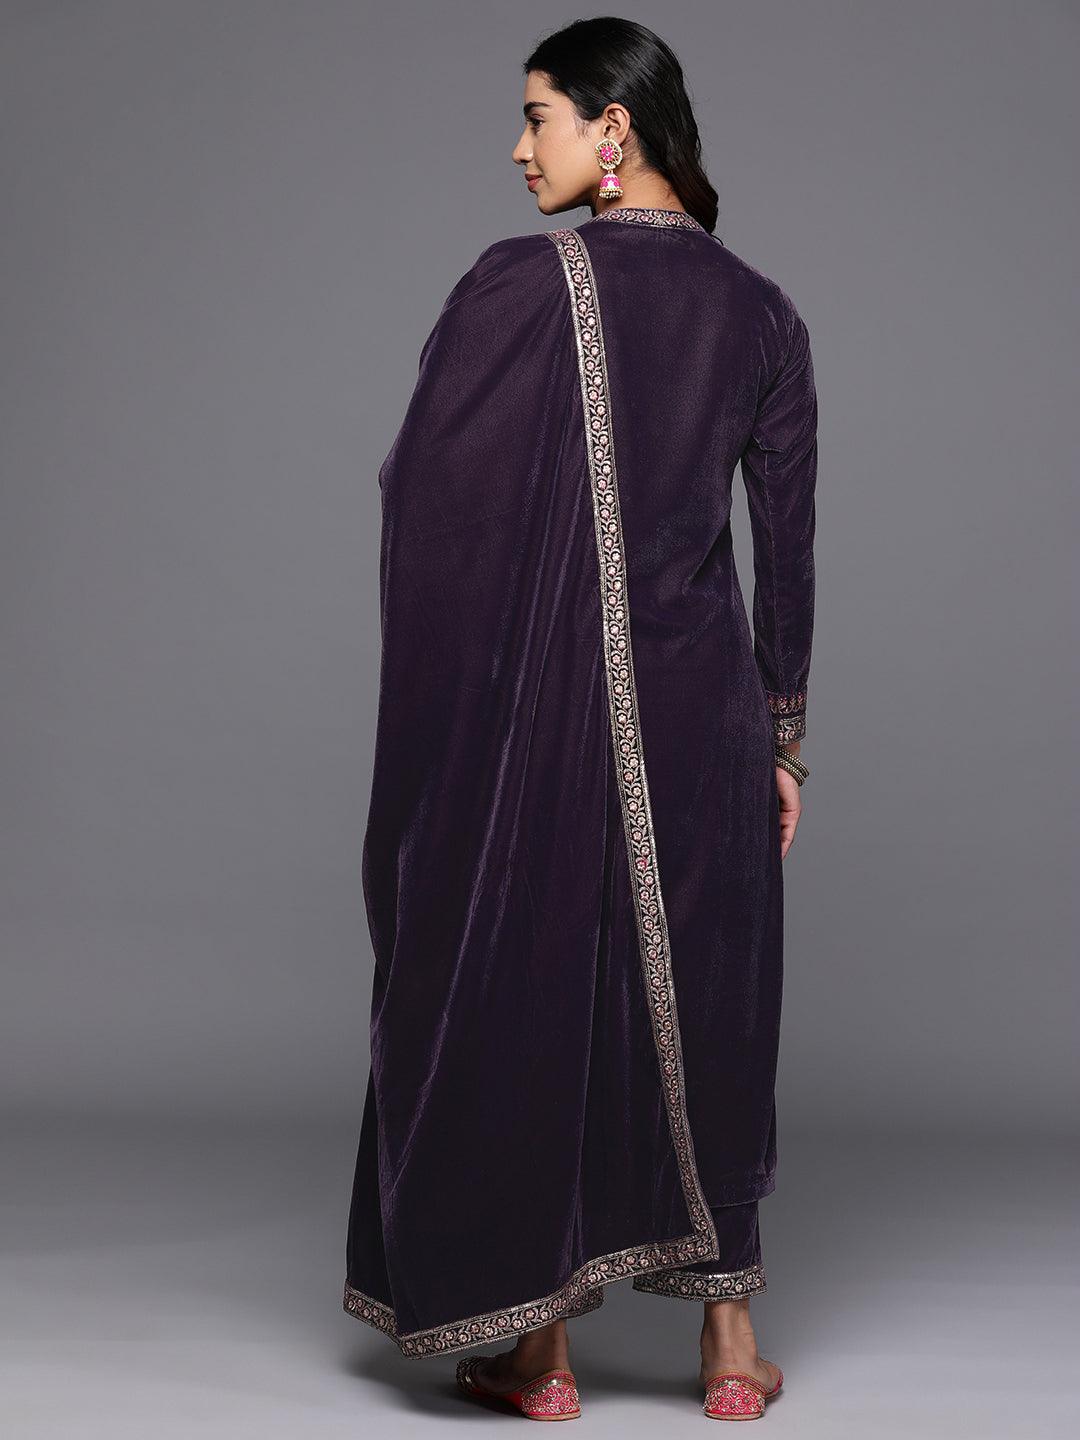 Libas Art Grey Embroidered Velvet Straight Suit With Dupatta